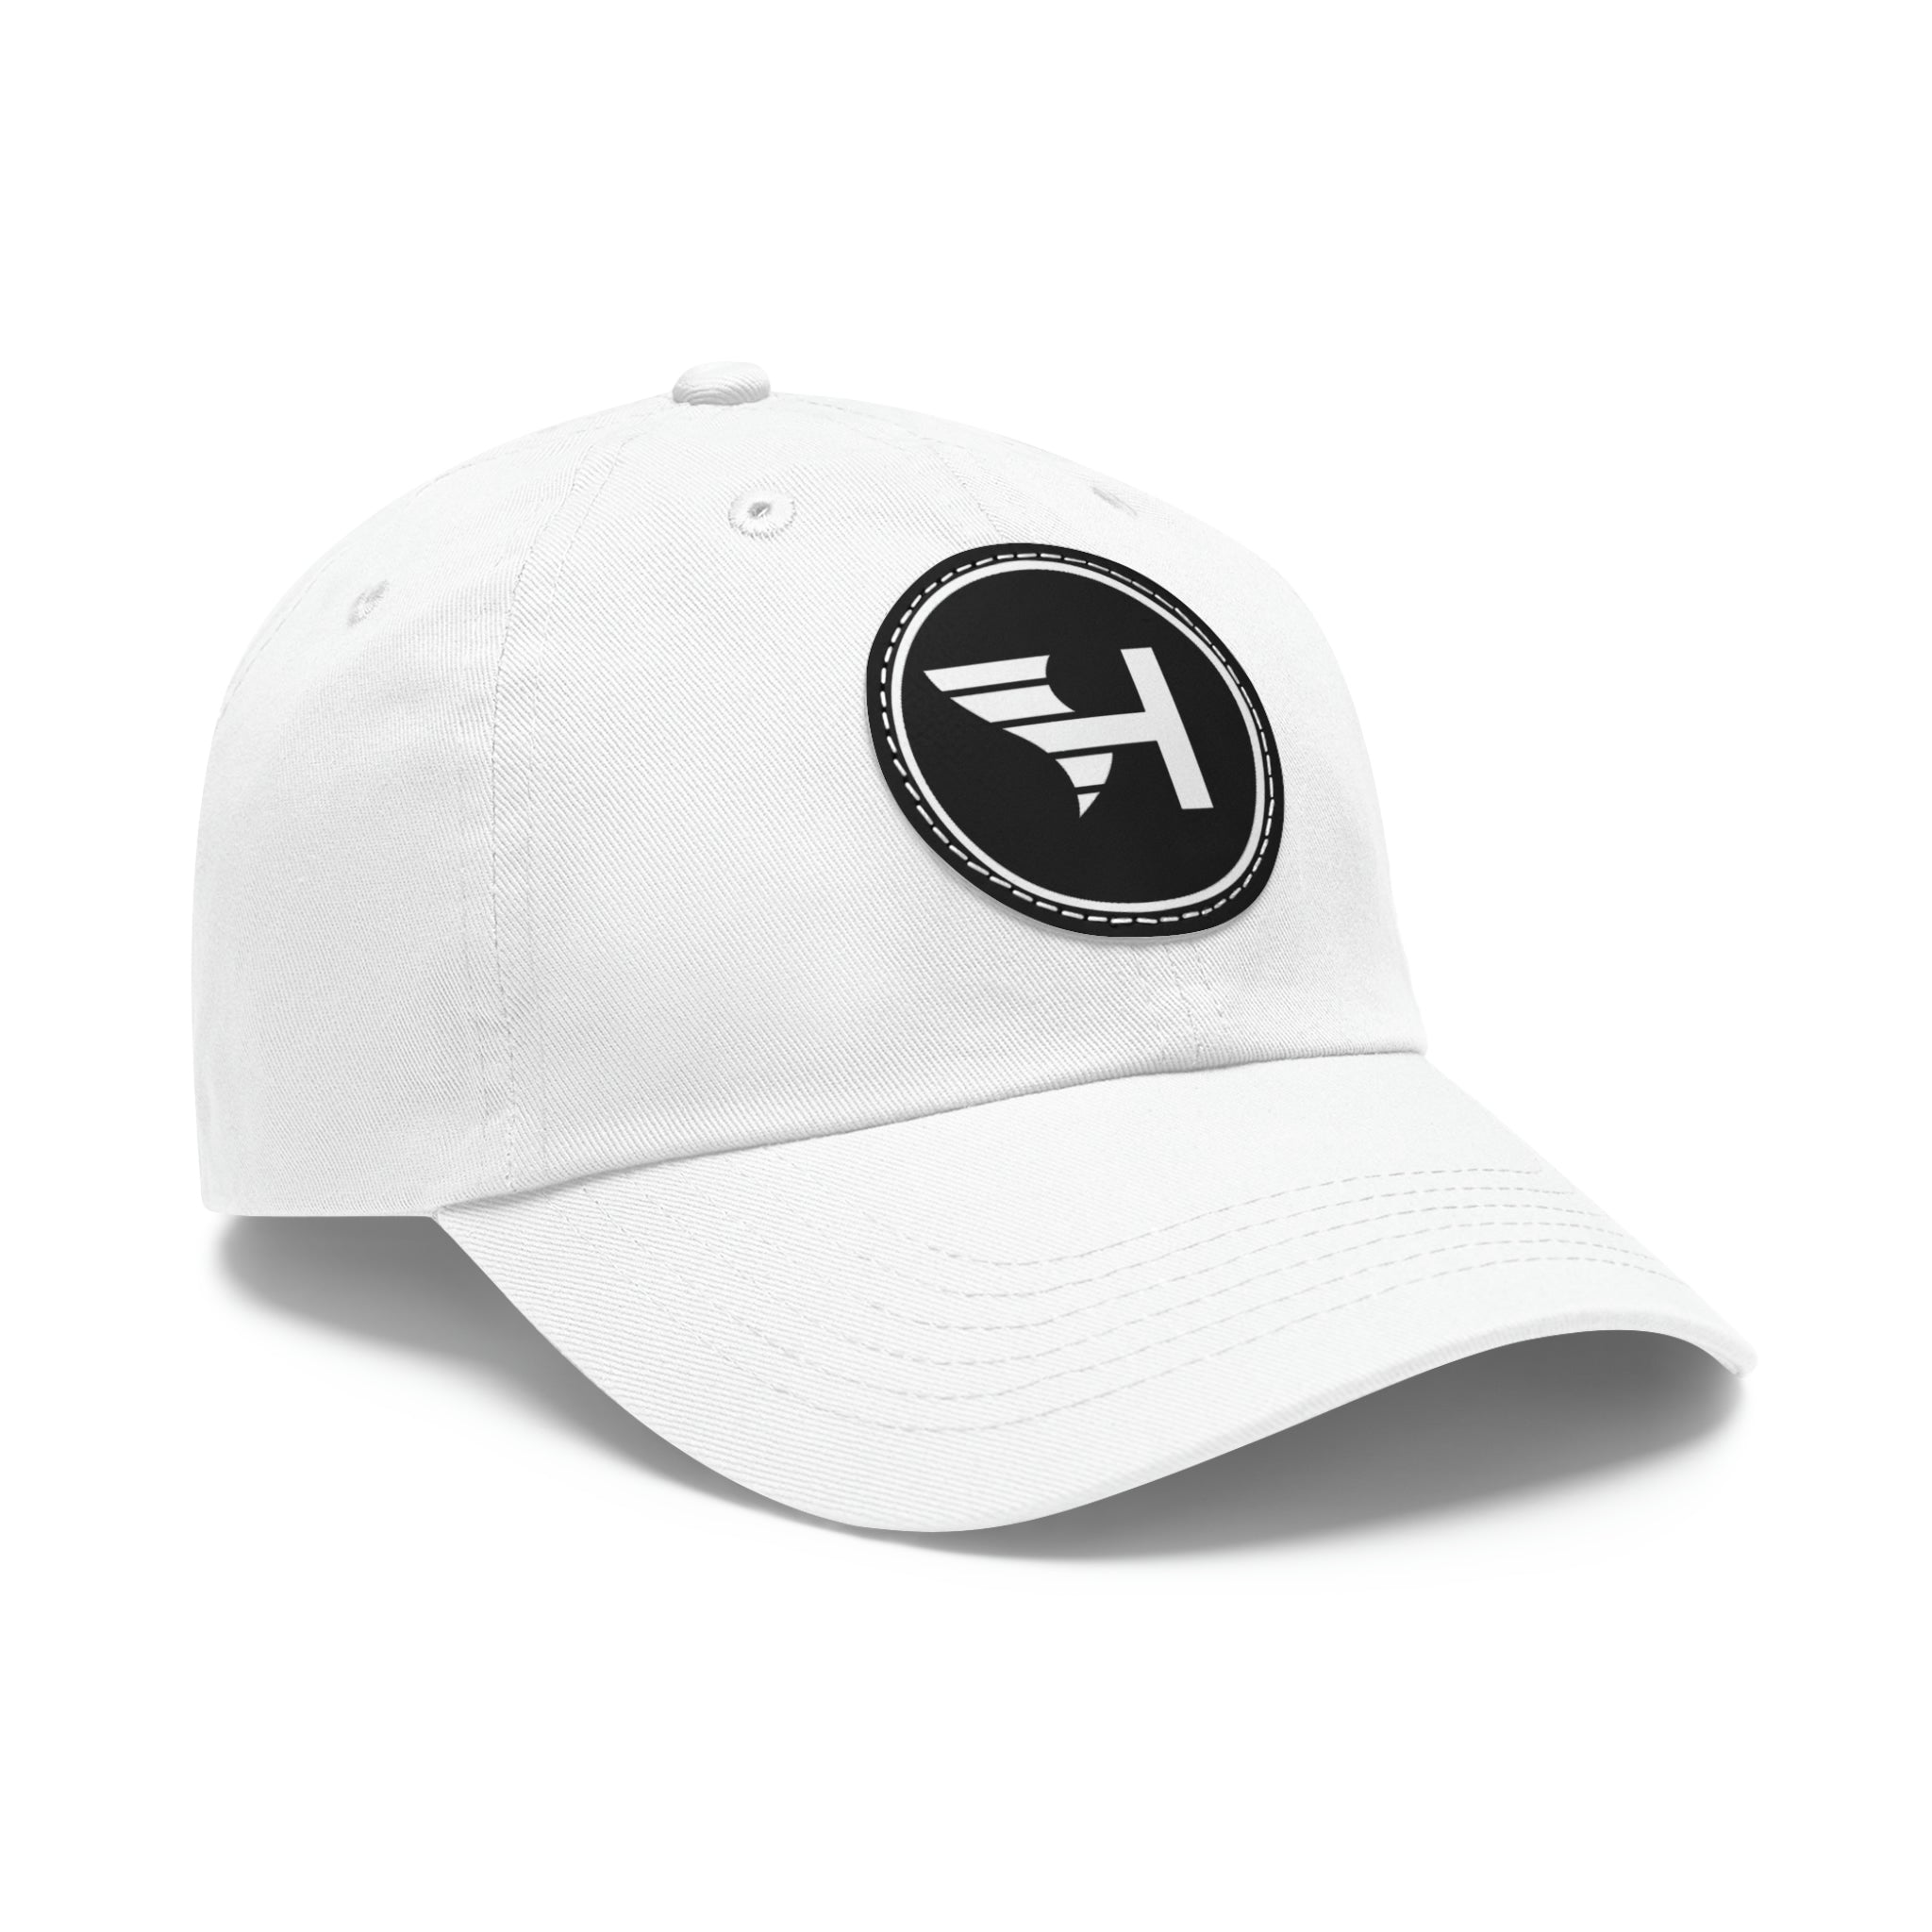 Helicity Designs Hat 